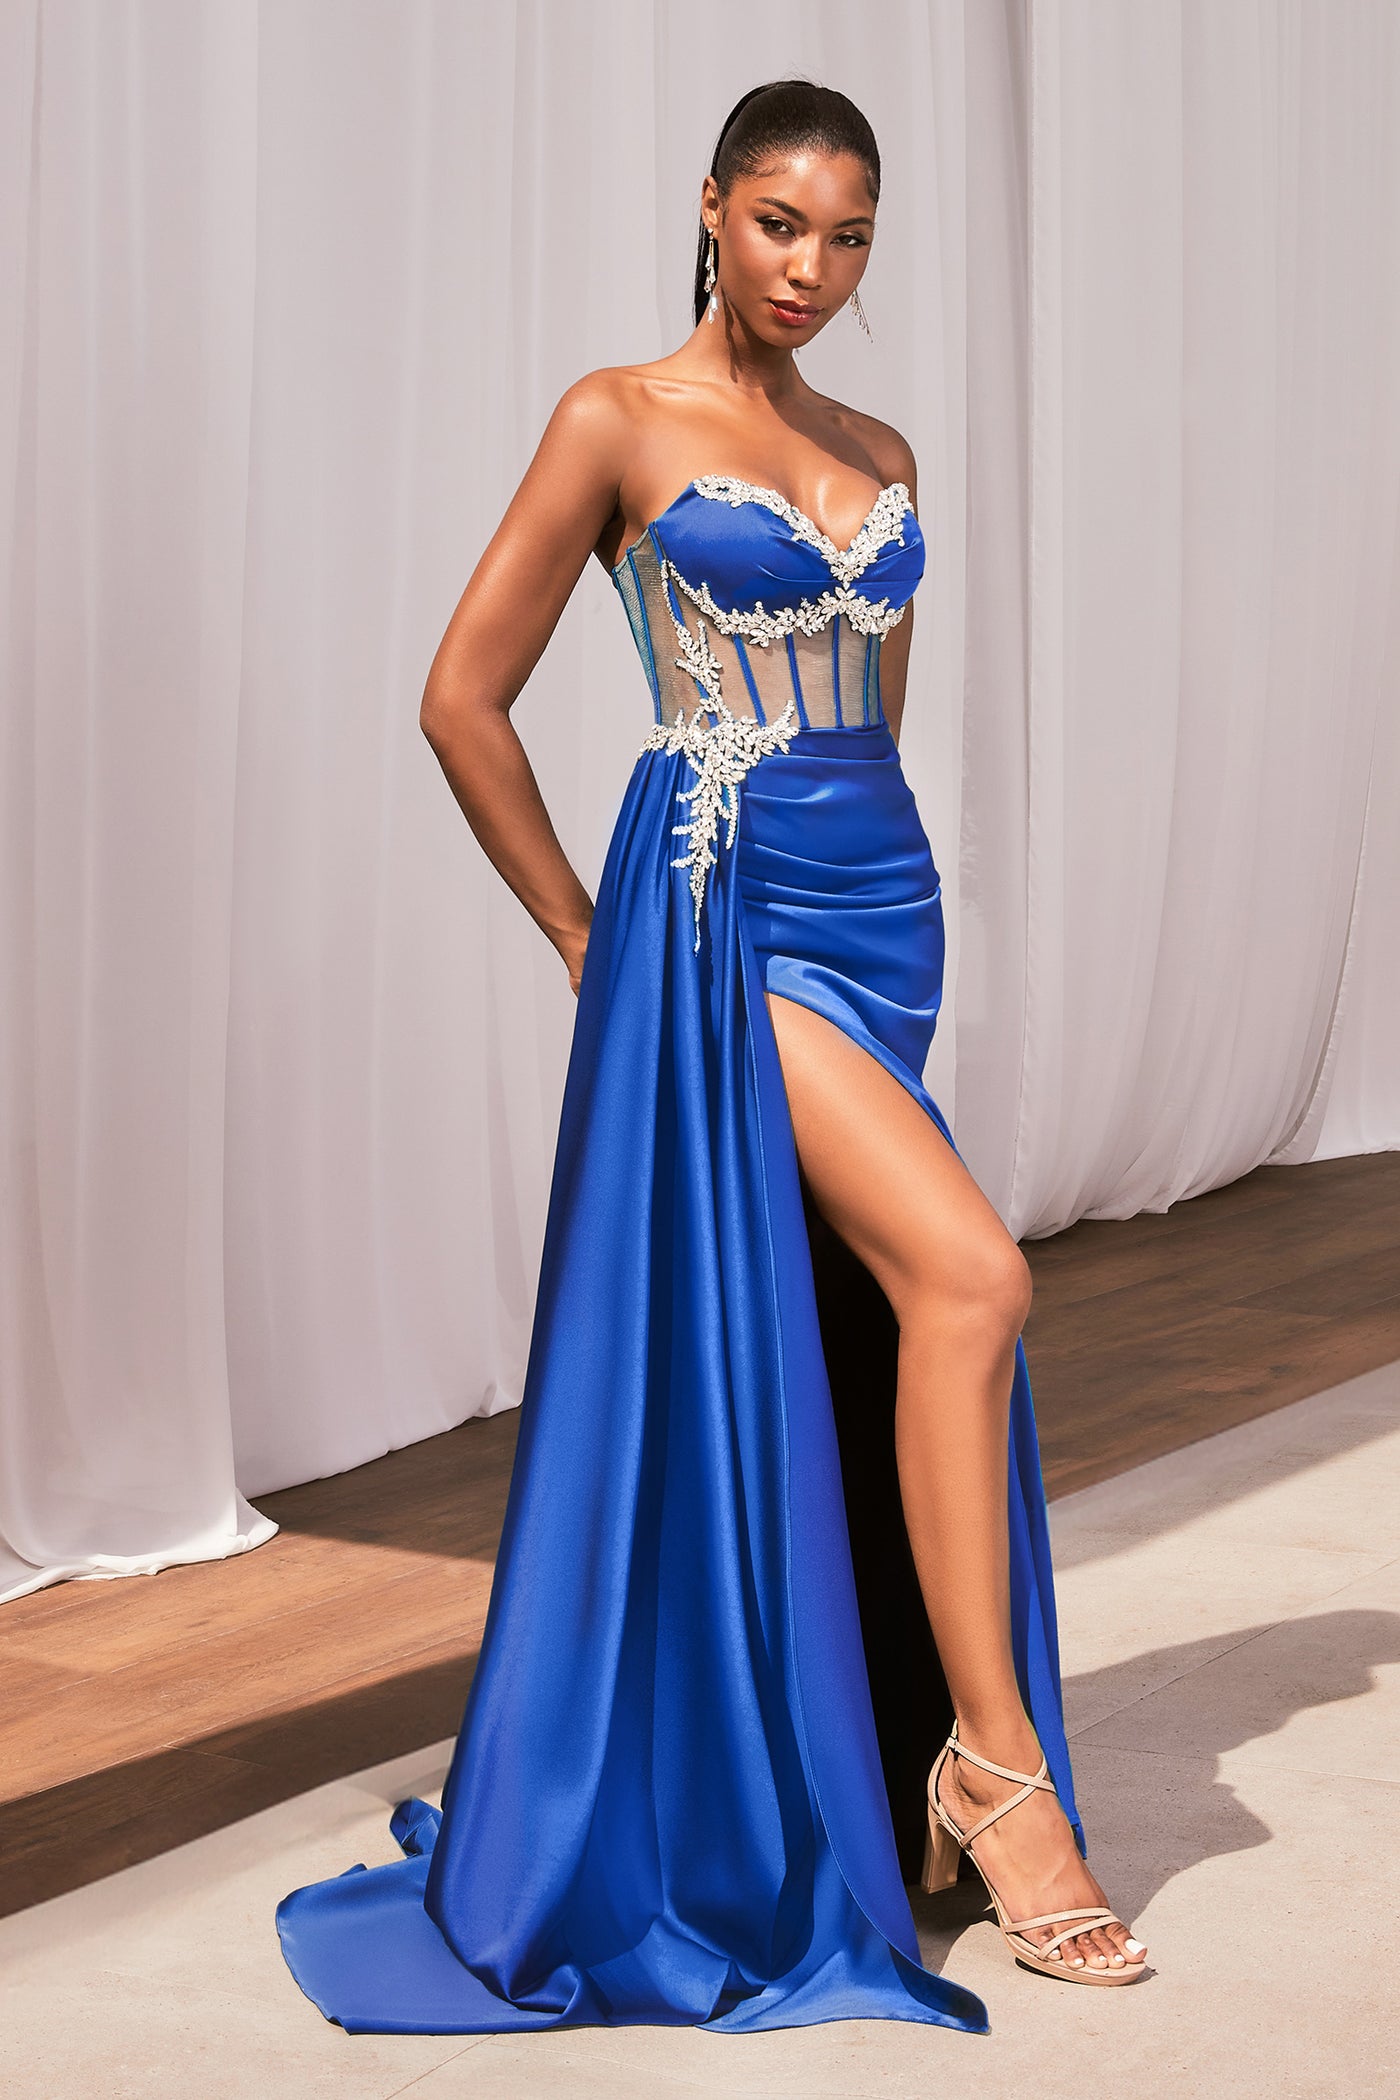 Ladivine CD343 - Beaded Appliqued Evening Gown